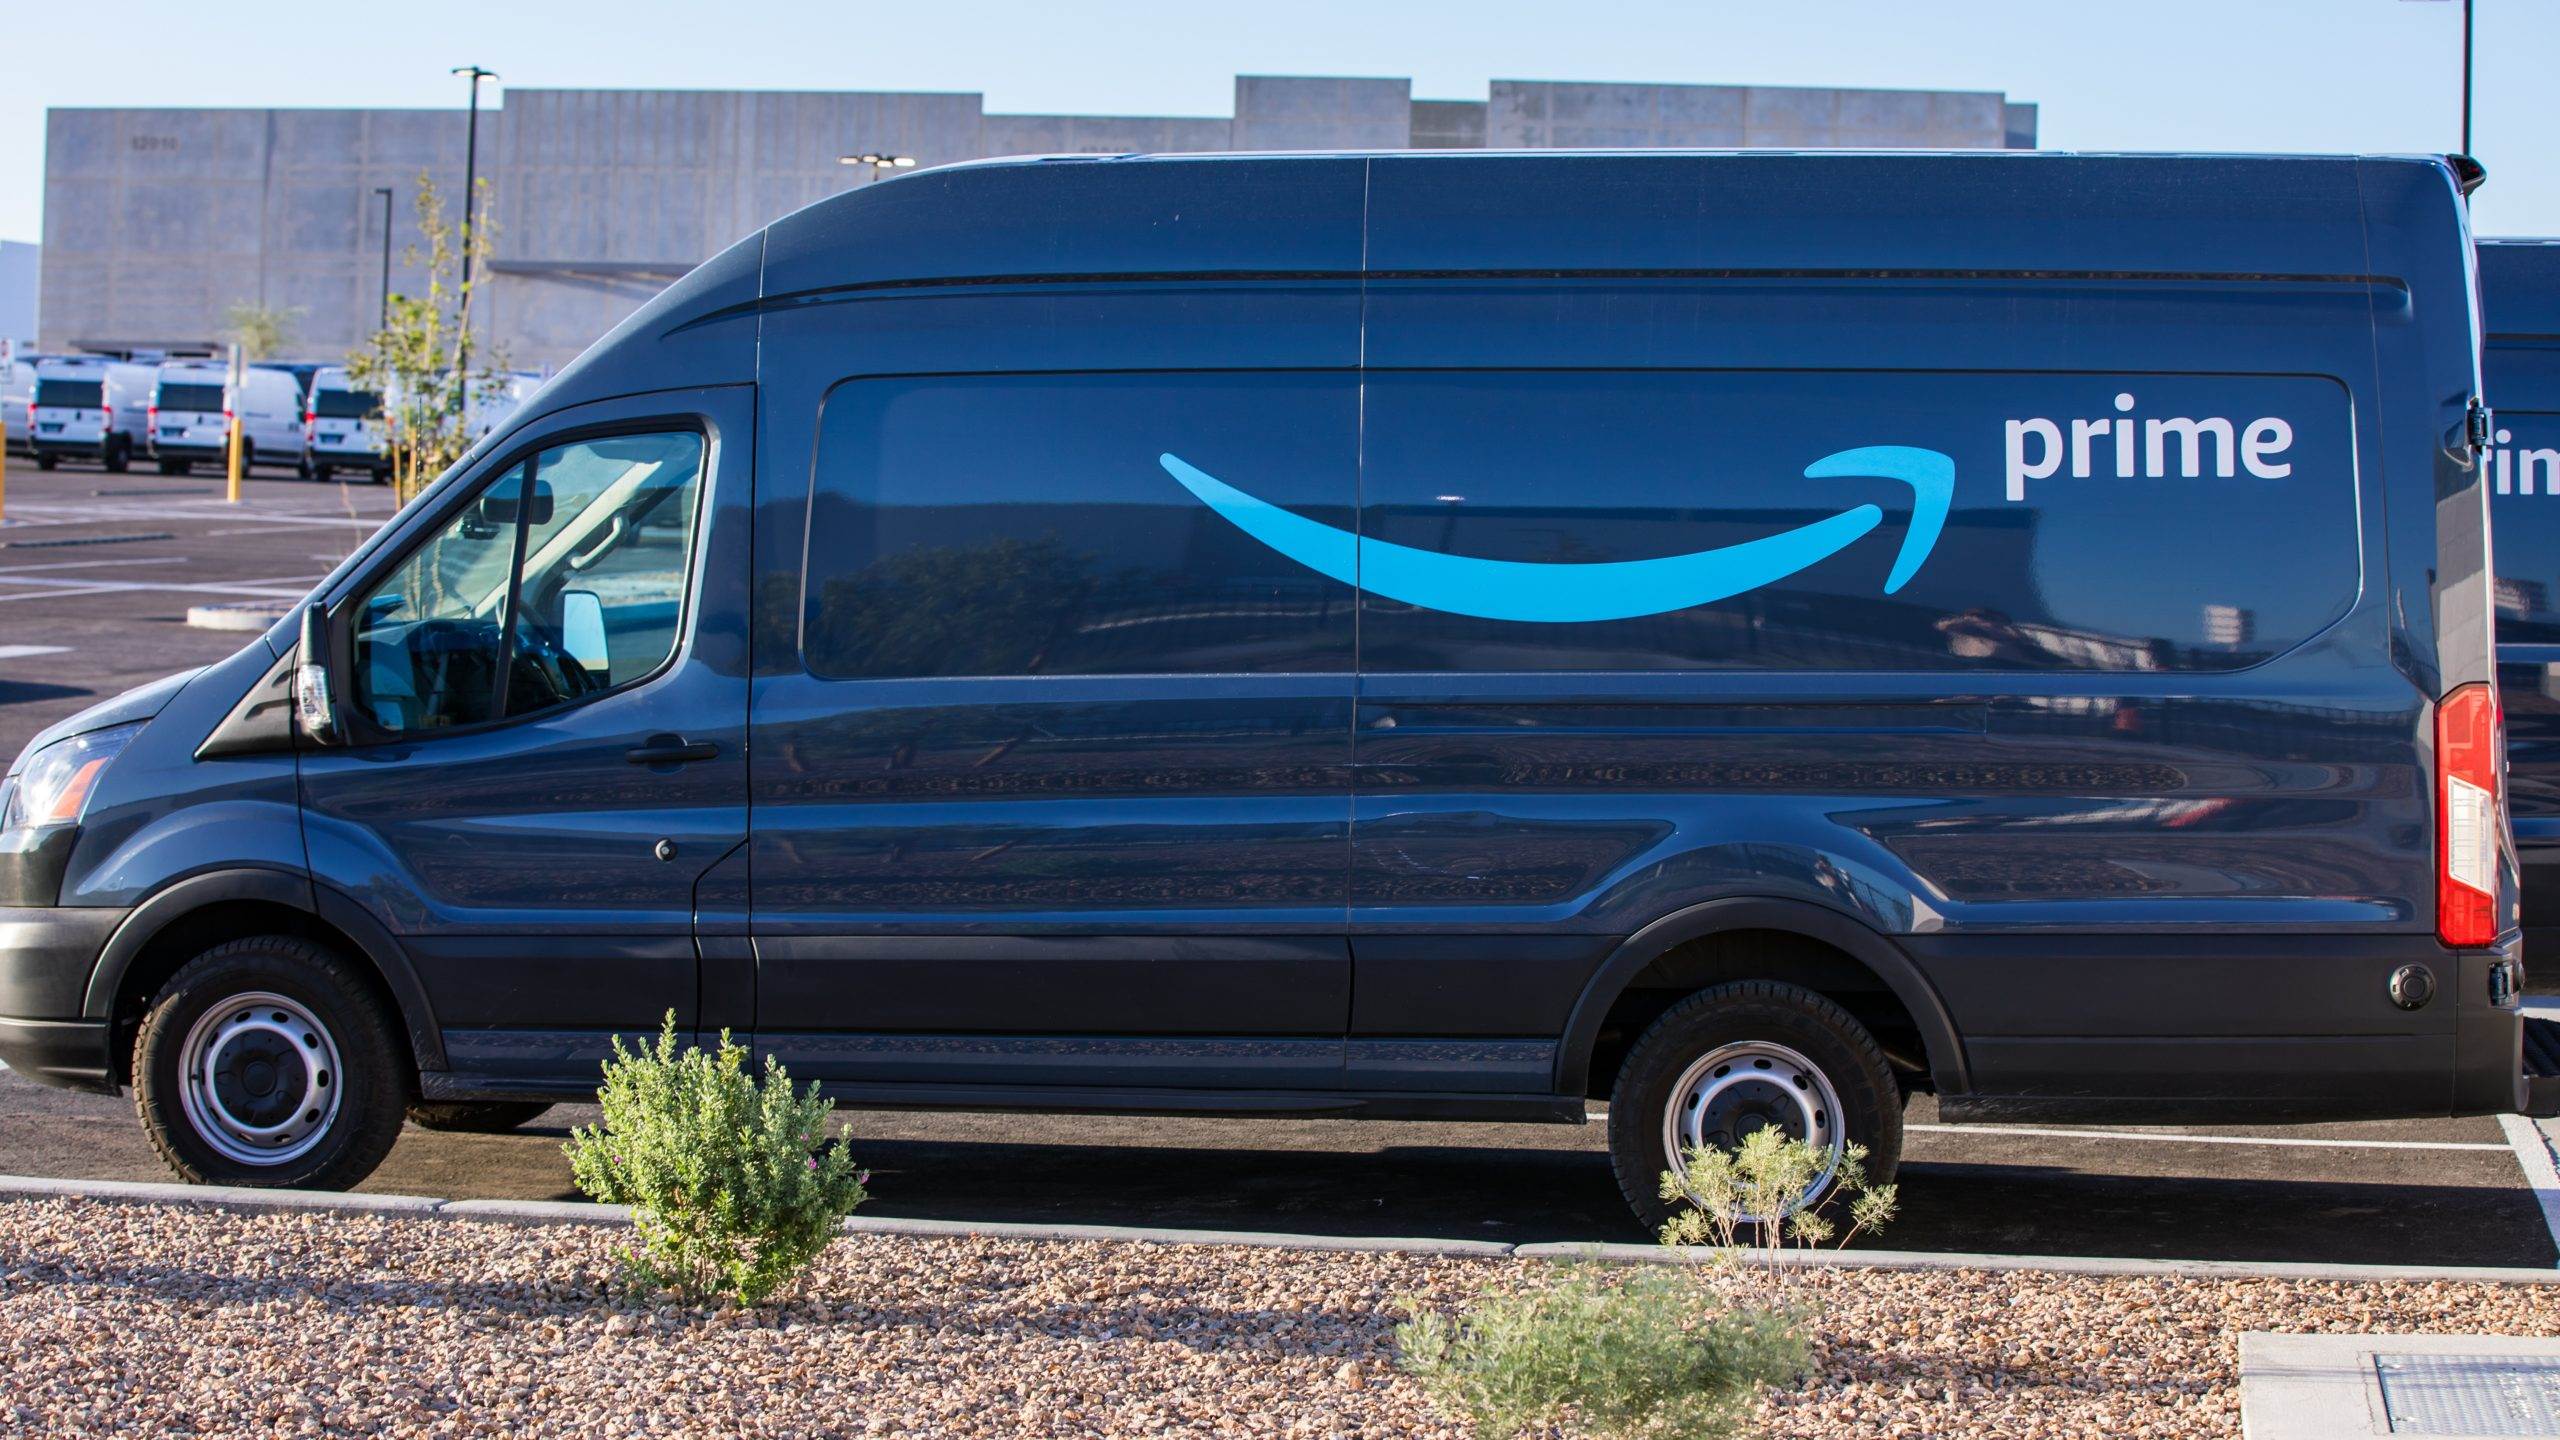 amazon driver fired for woman exiting rear of van